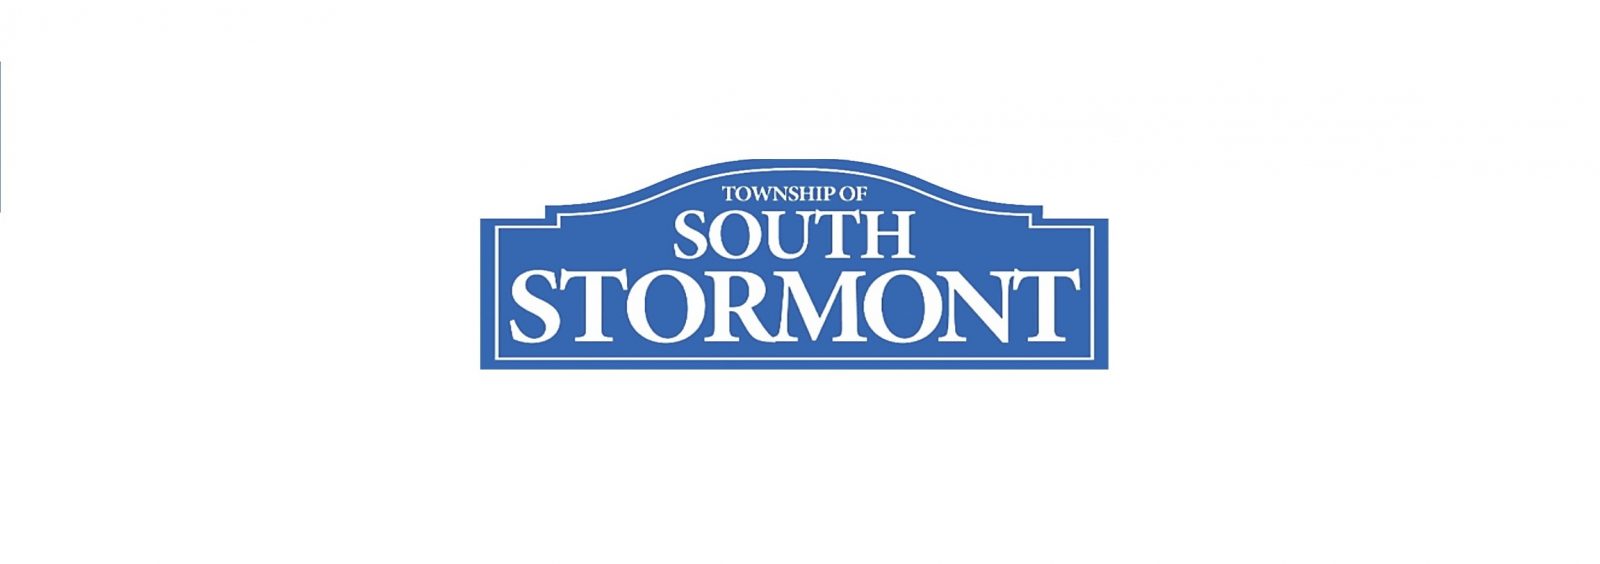 South Stormont taxes deferred